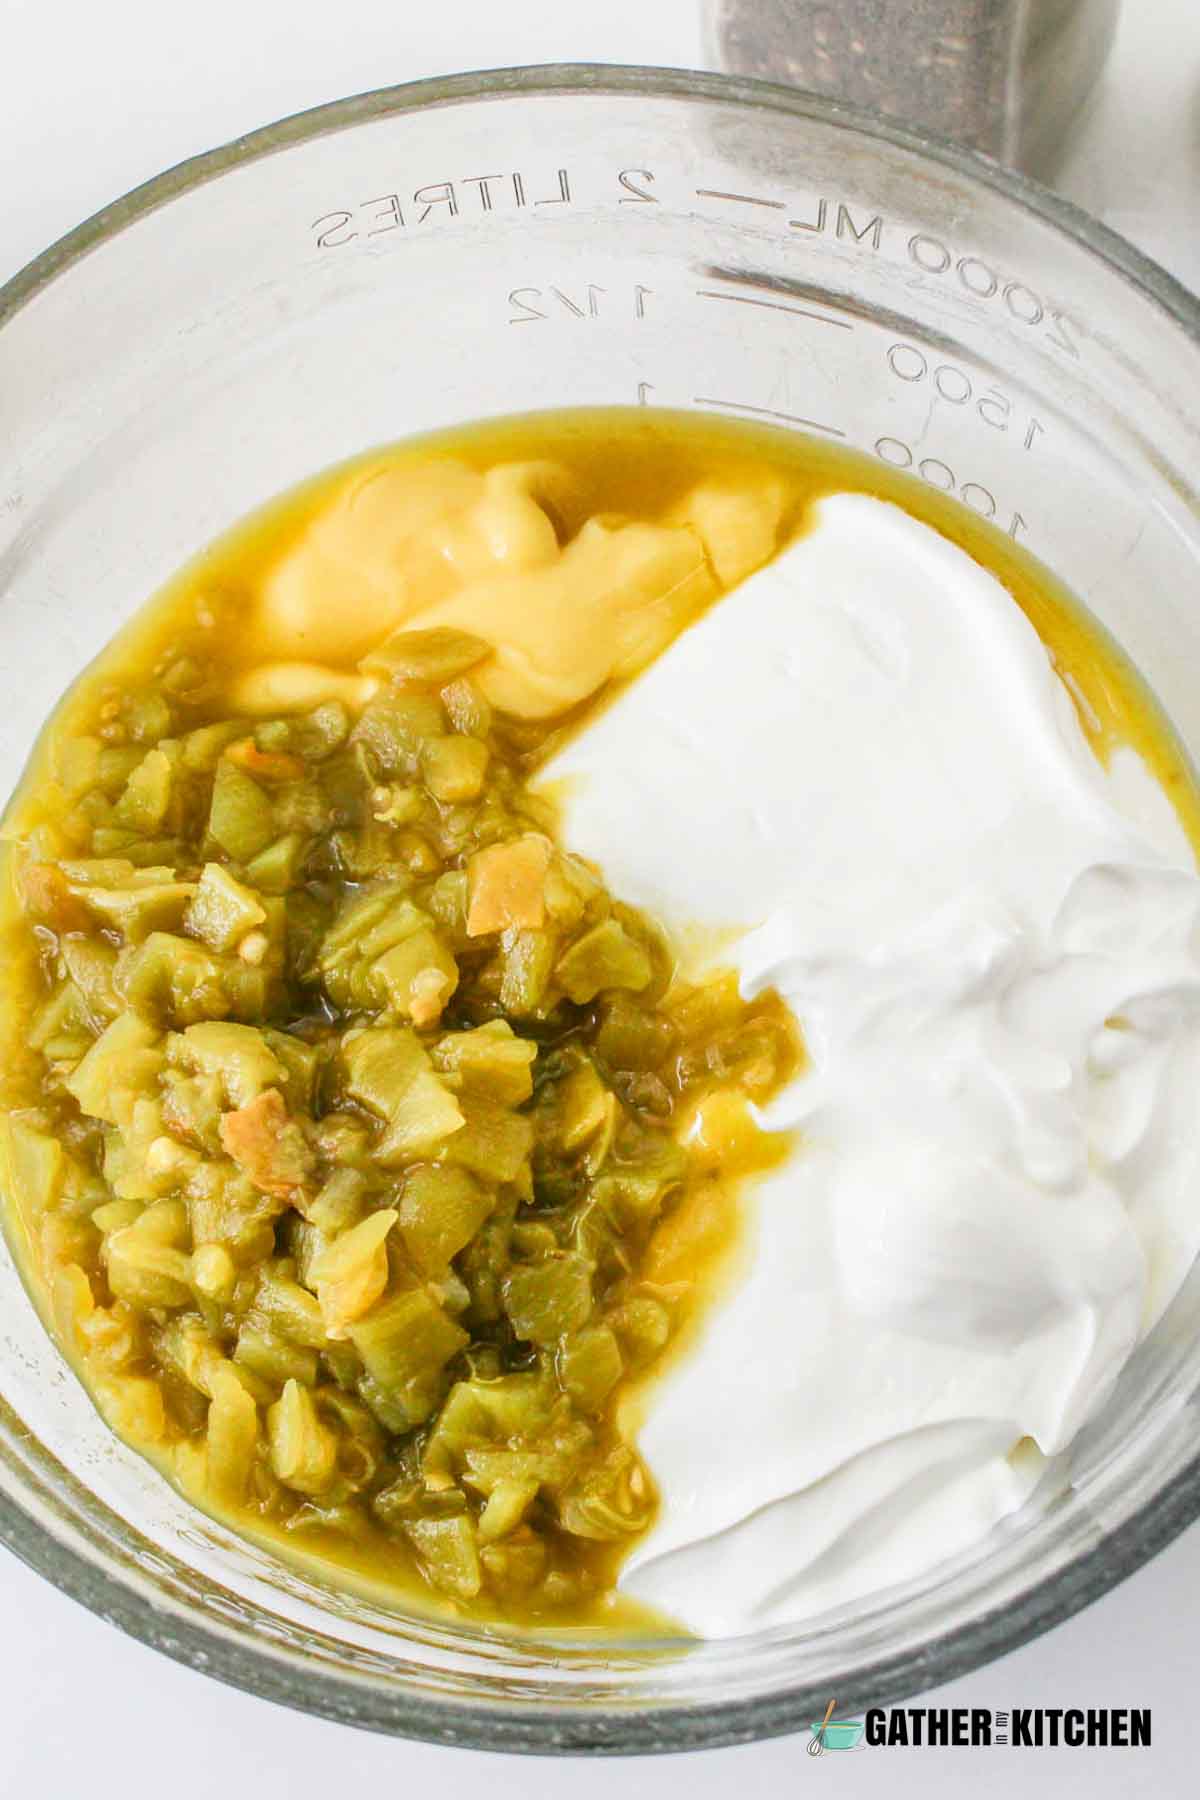 Mixture of cream, chilis, and milk in a bowl.